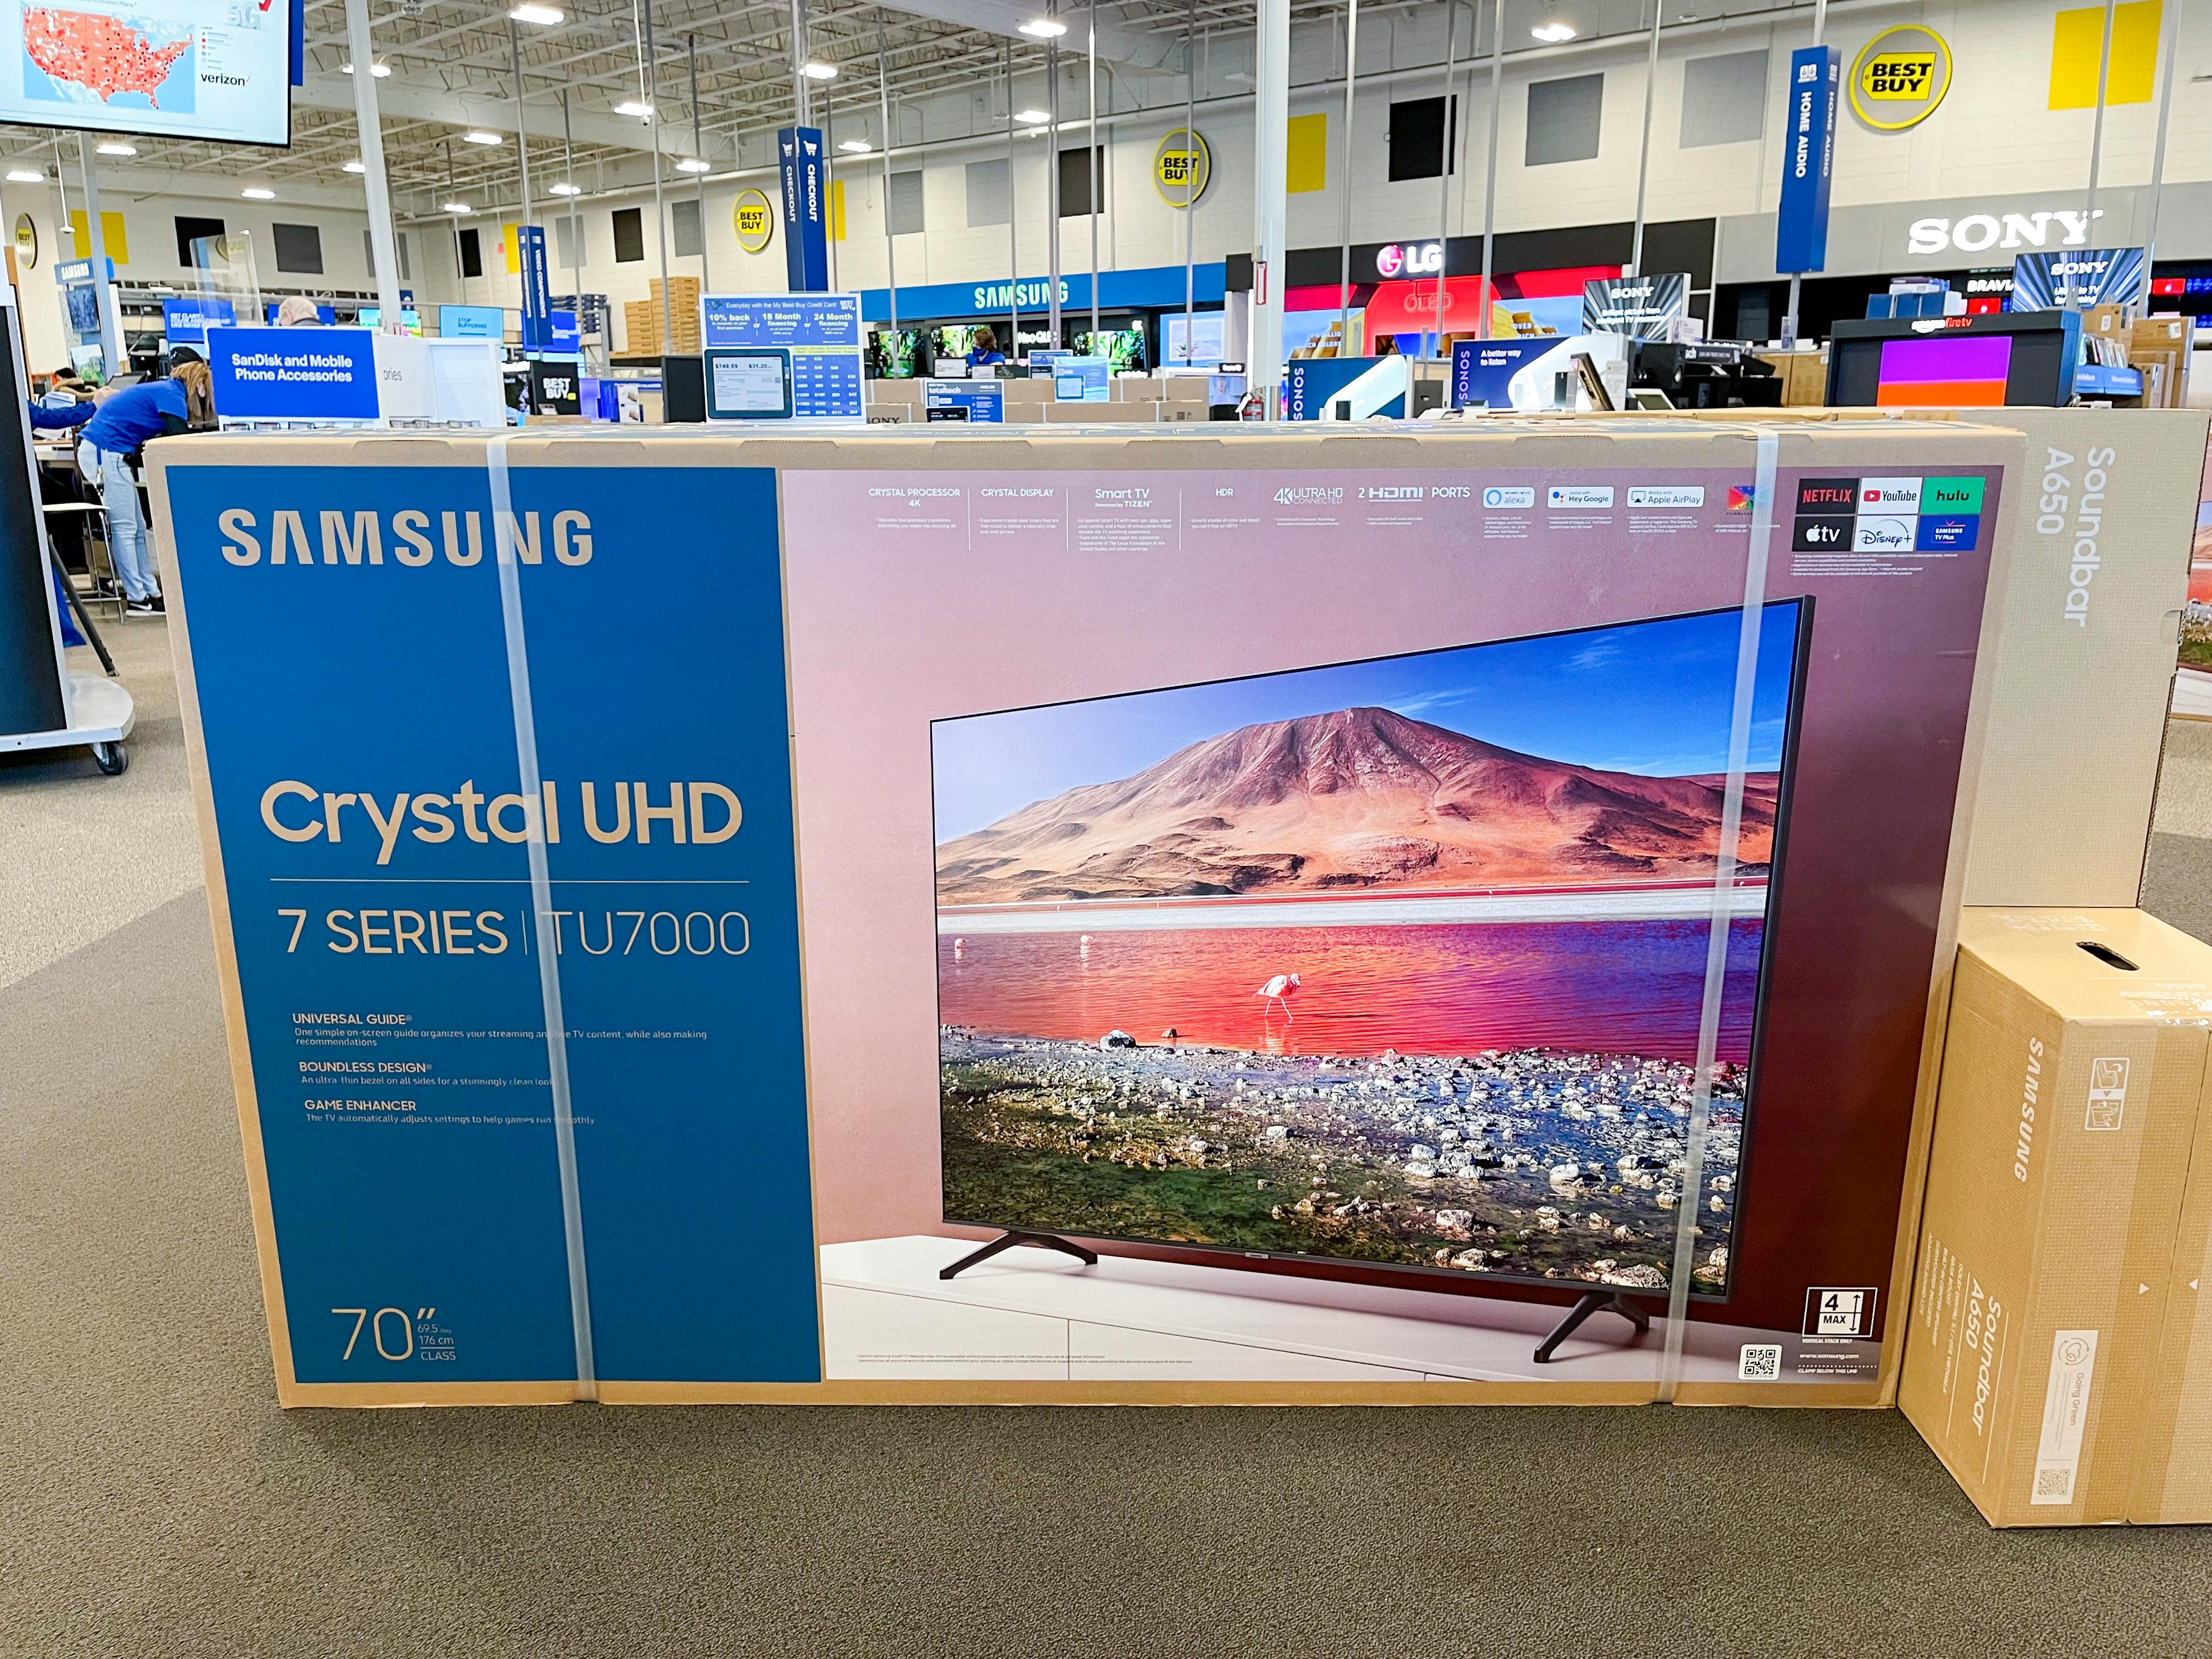 A Samsung 70inch TV on sale at Best Buy